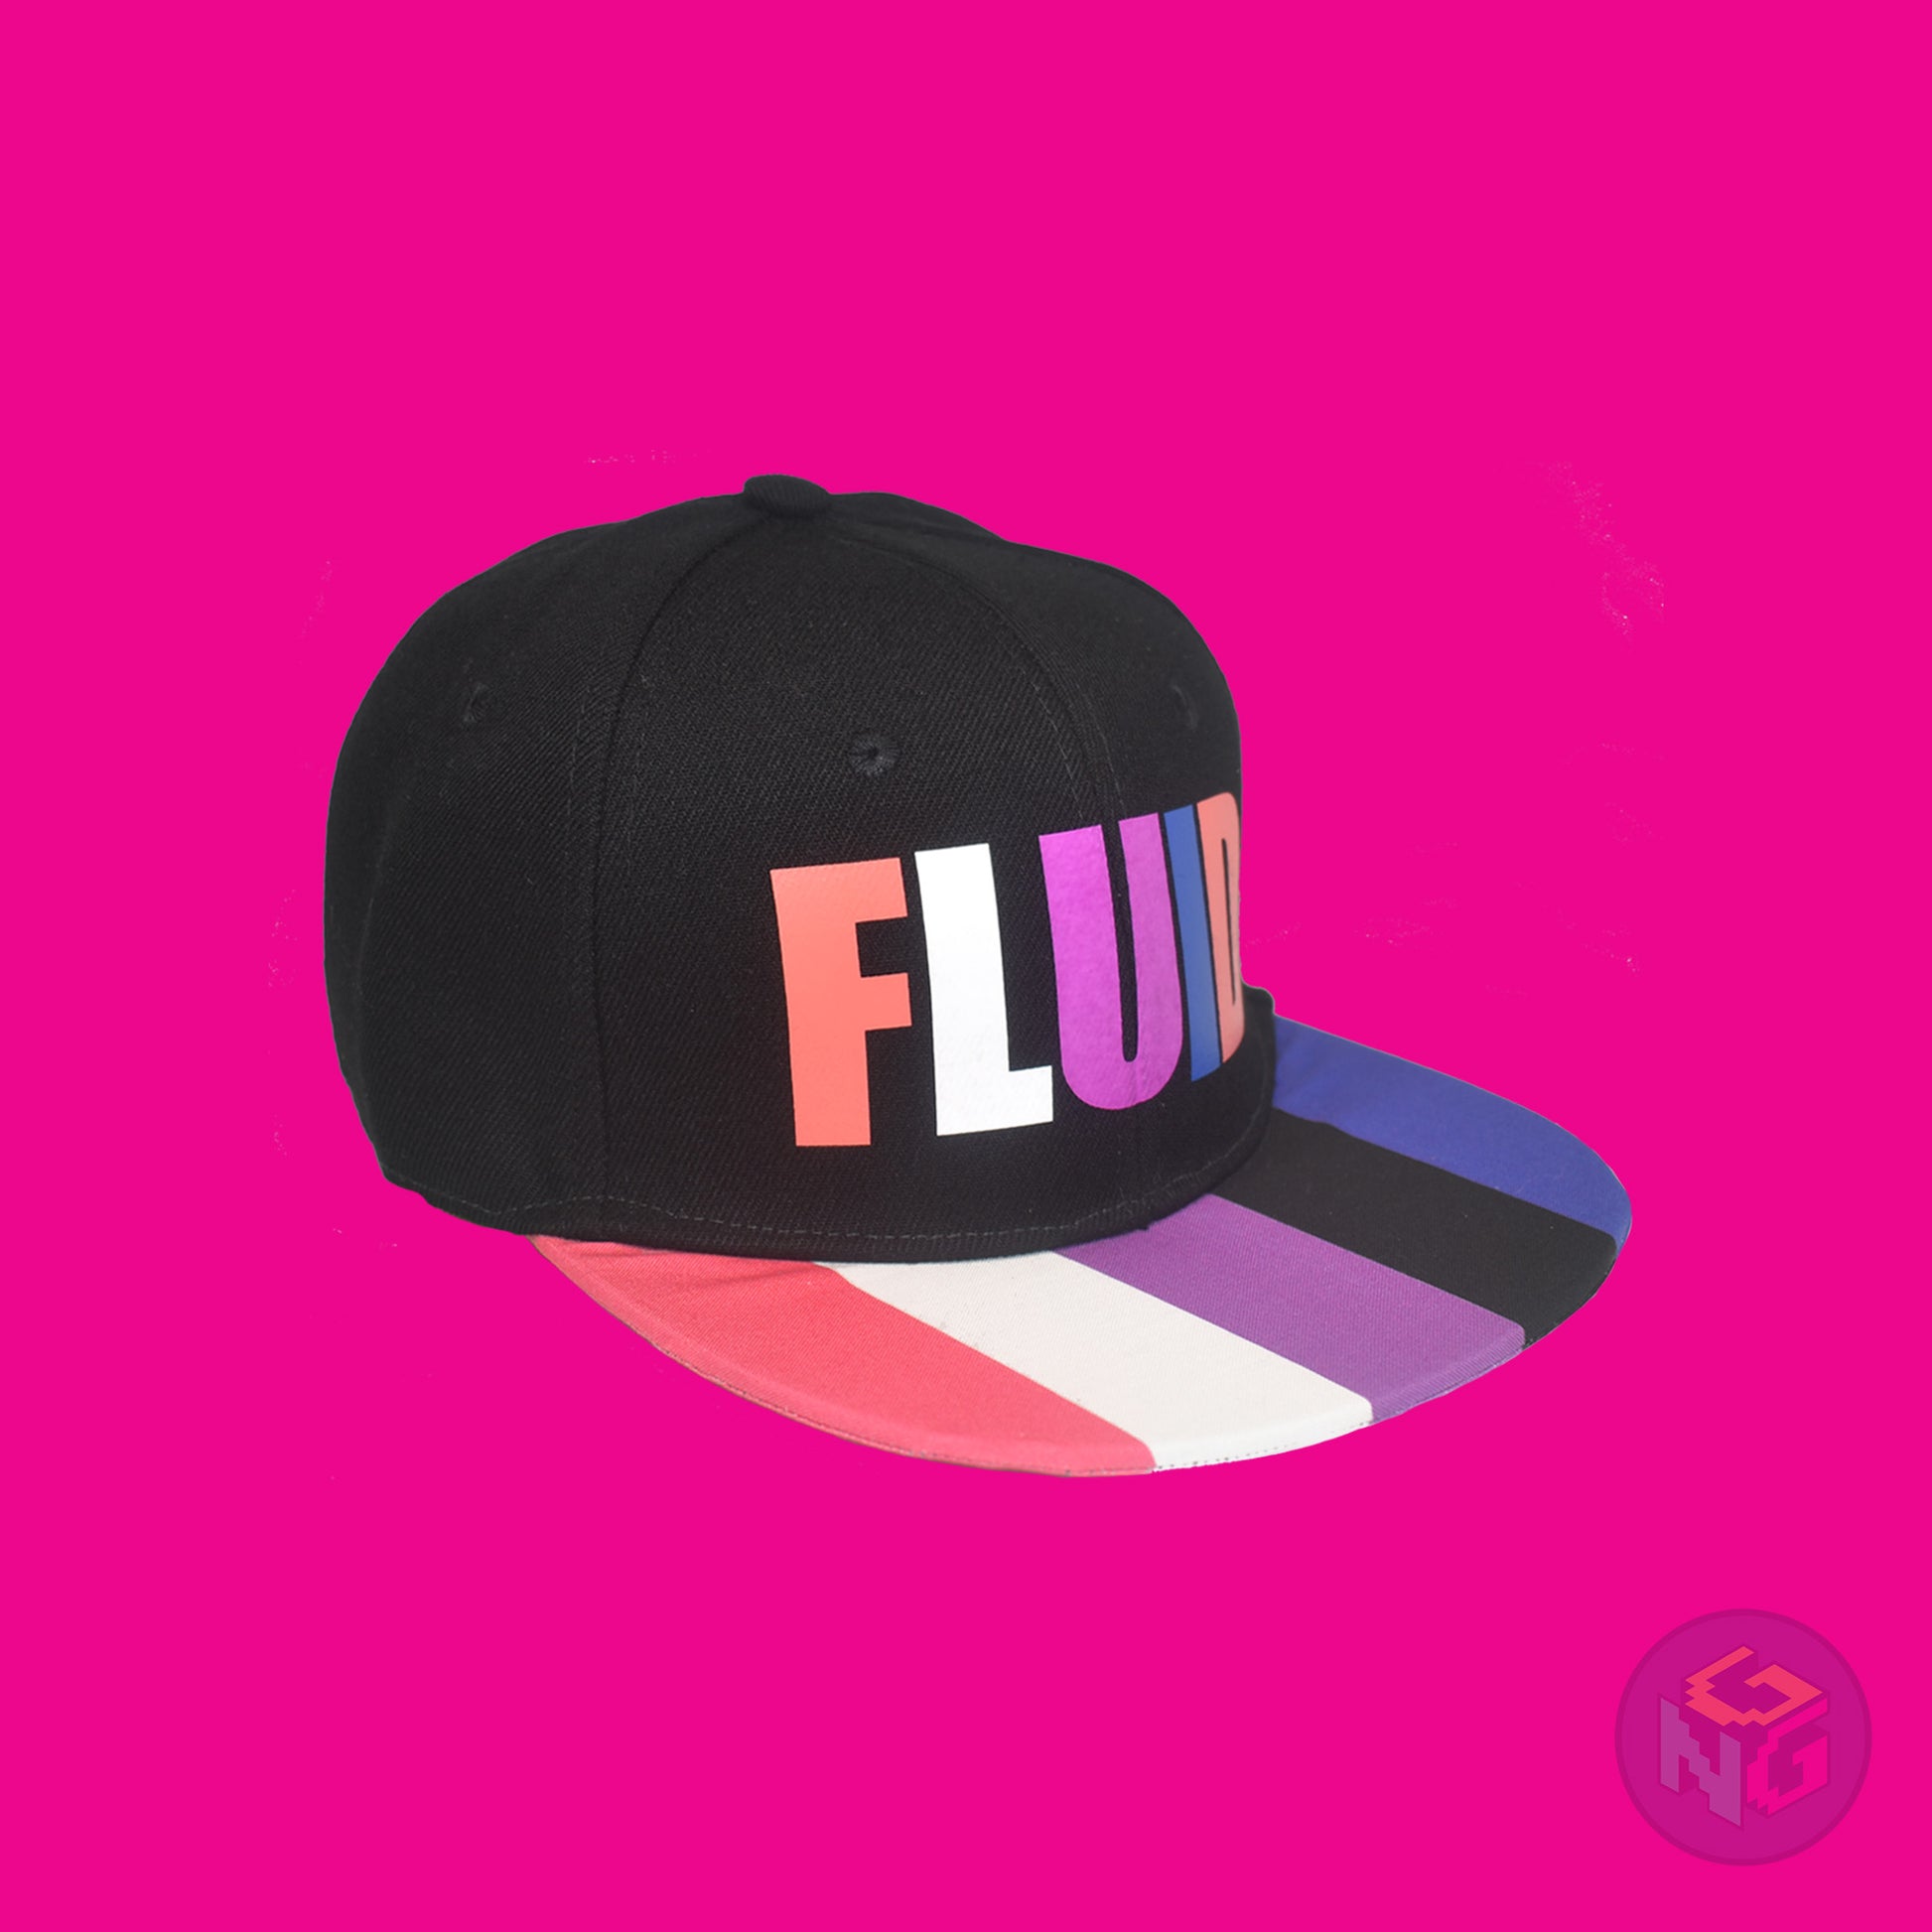 Black flat bill snapback hat. The brim has the genderfluid pride flag on both sides and the front of the hat has the word “FLUID” in peach, white, magenta, and royal blue letters. Front right view